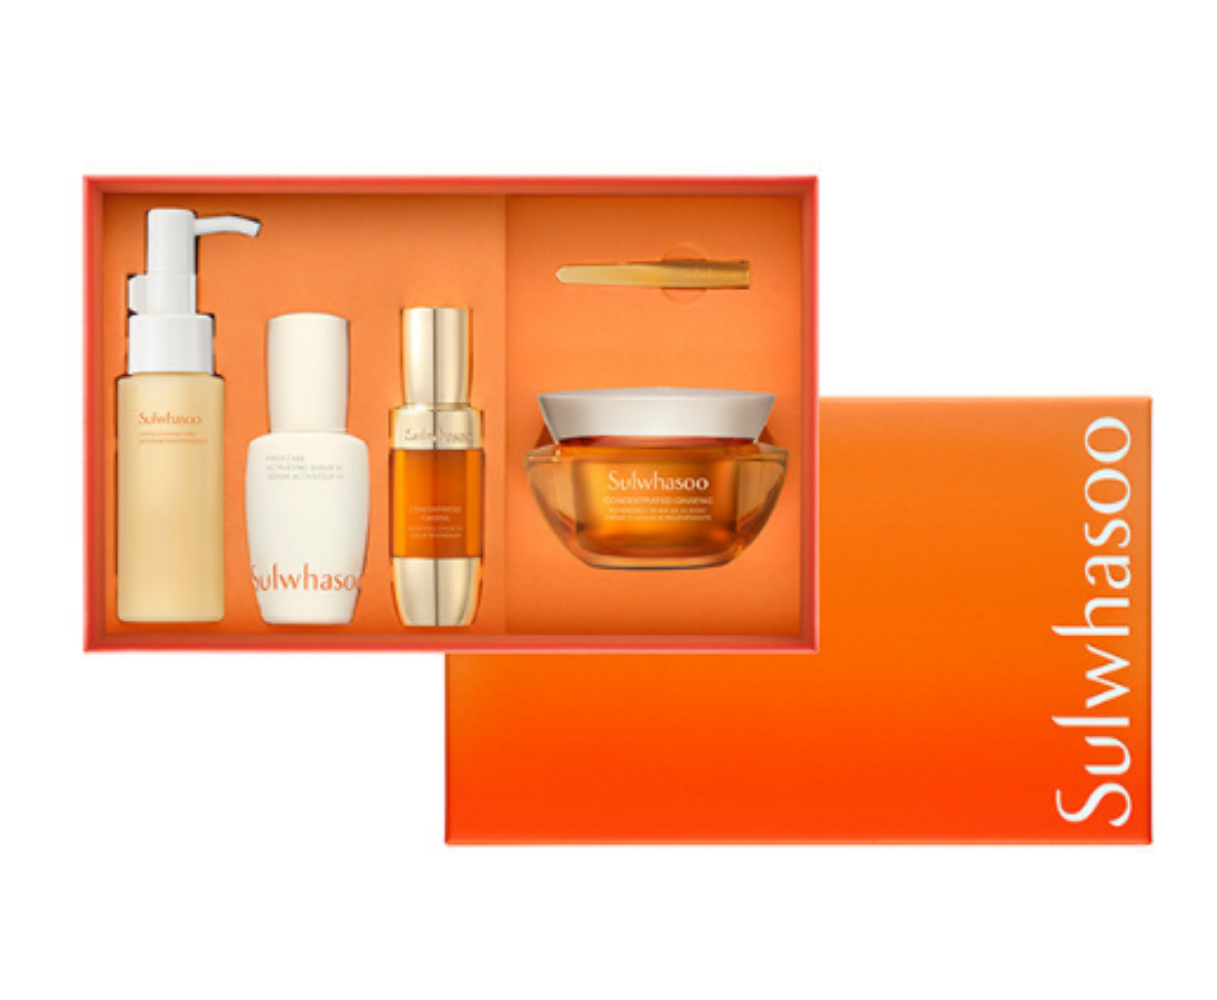 Sulwhasoo_Concentrated_Ginseng_Renewing_Cream_EX_Classic_SET_-_6.png